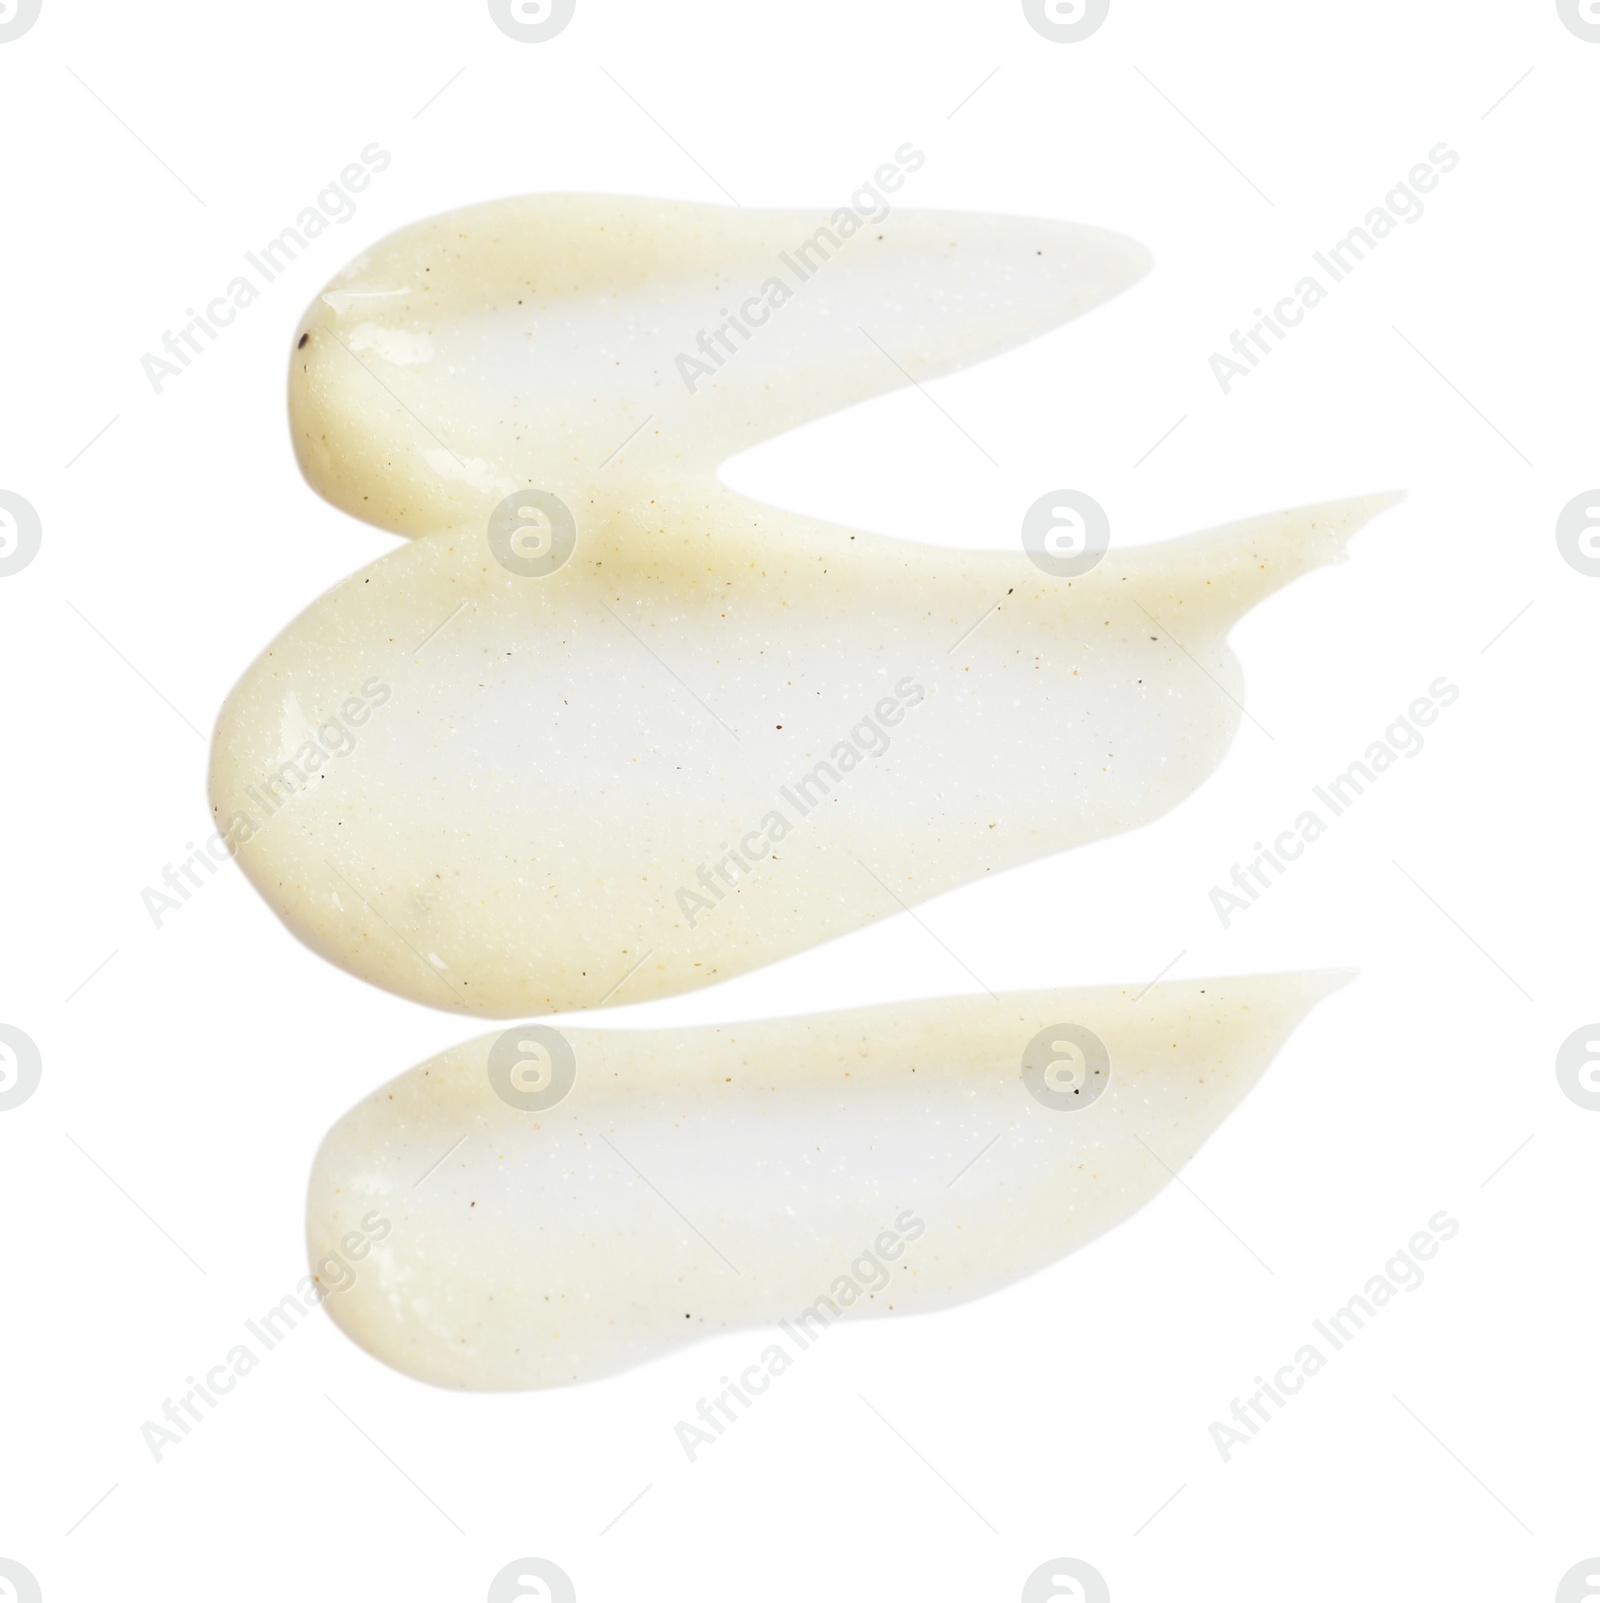 Photo of Samples of natural scrub on white background, top view